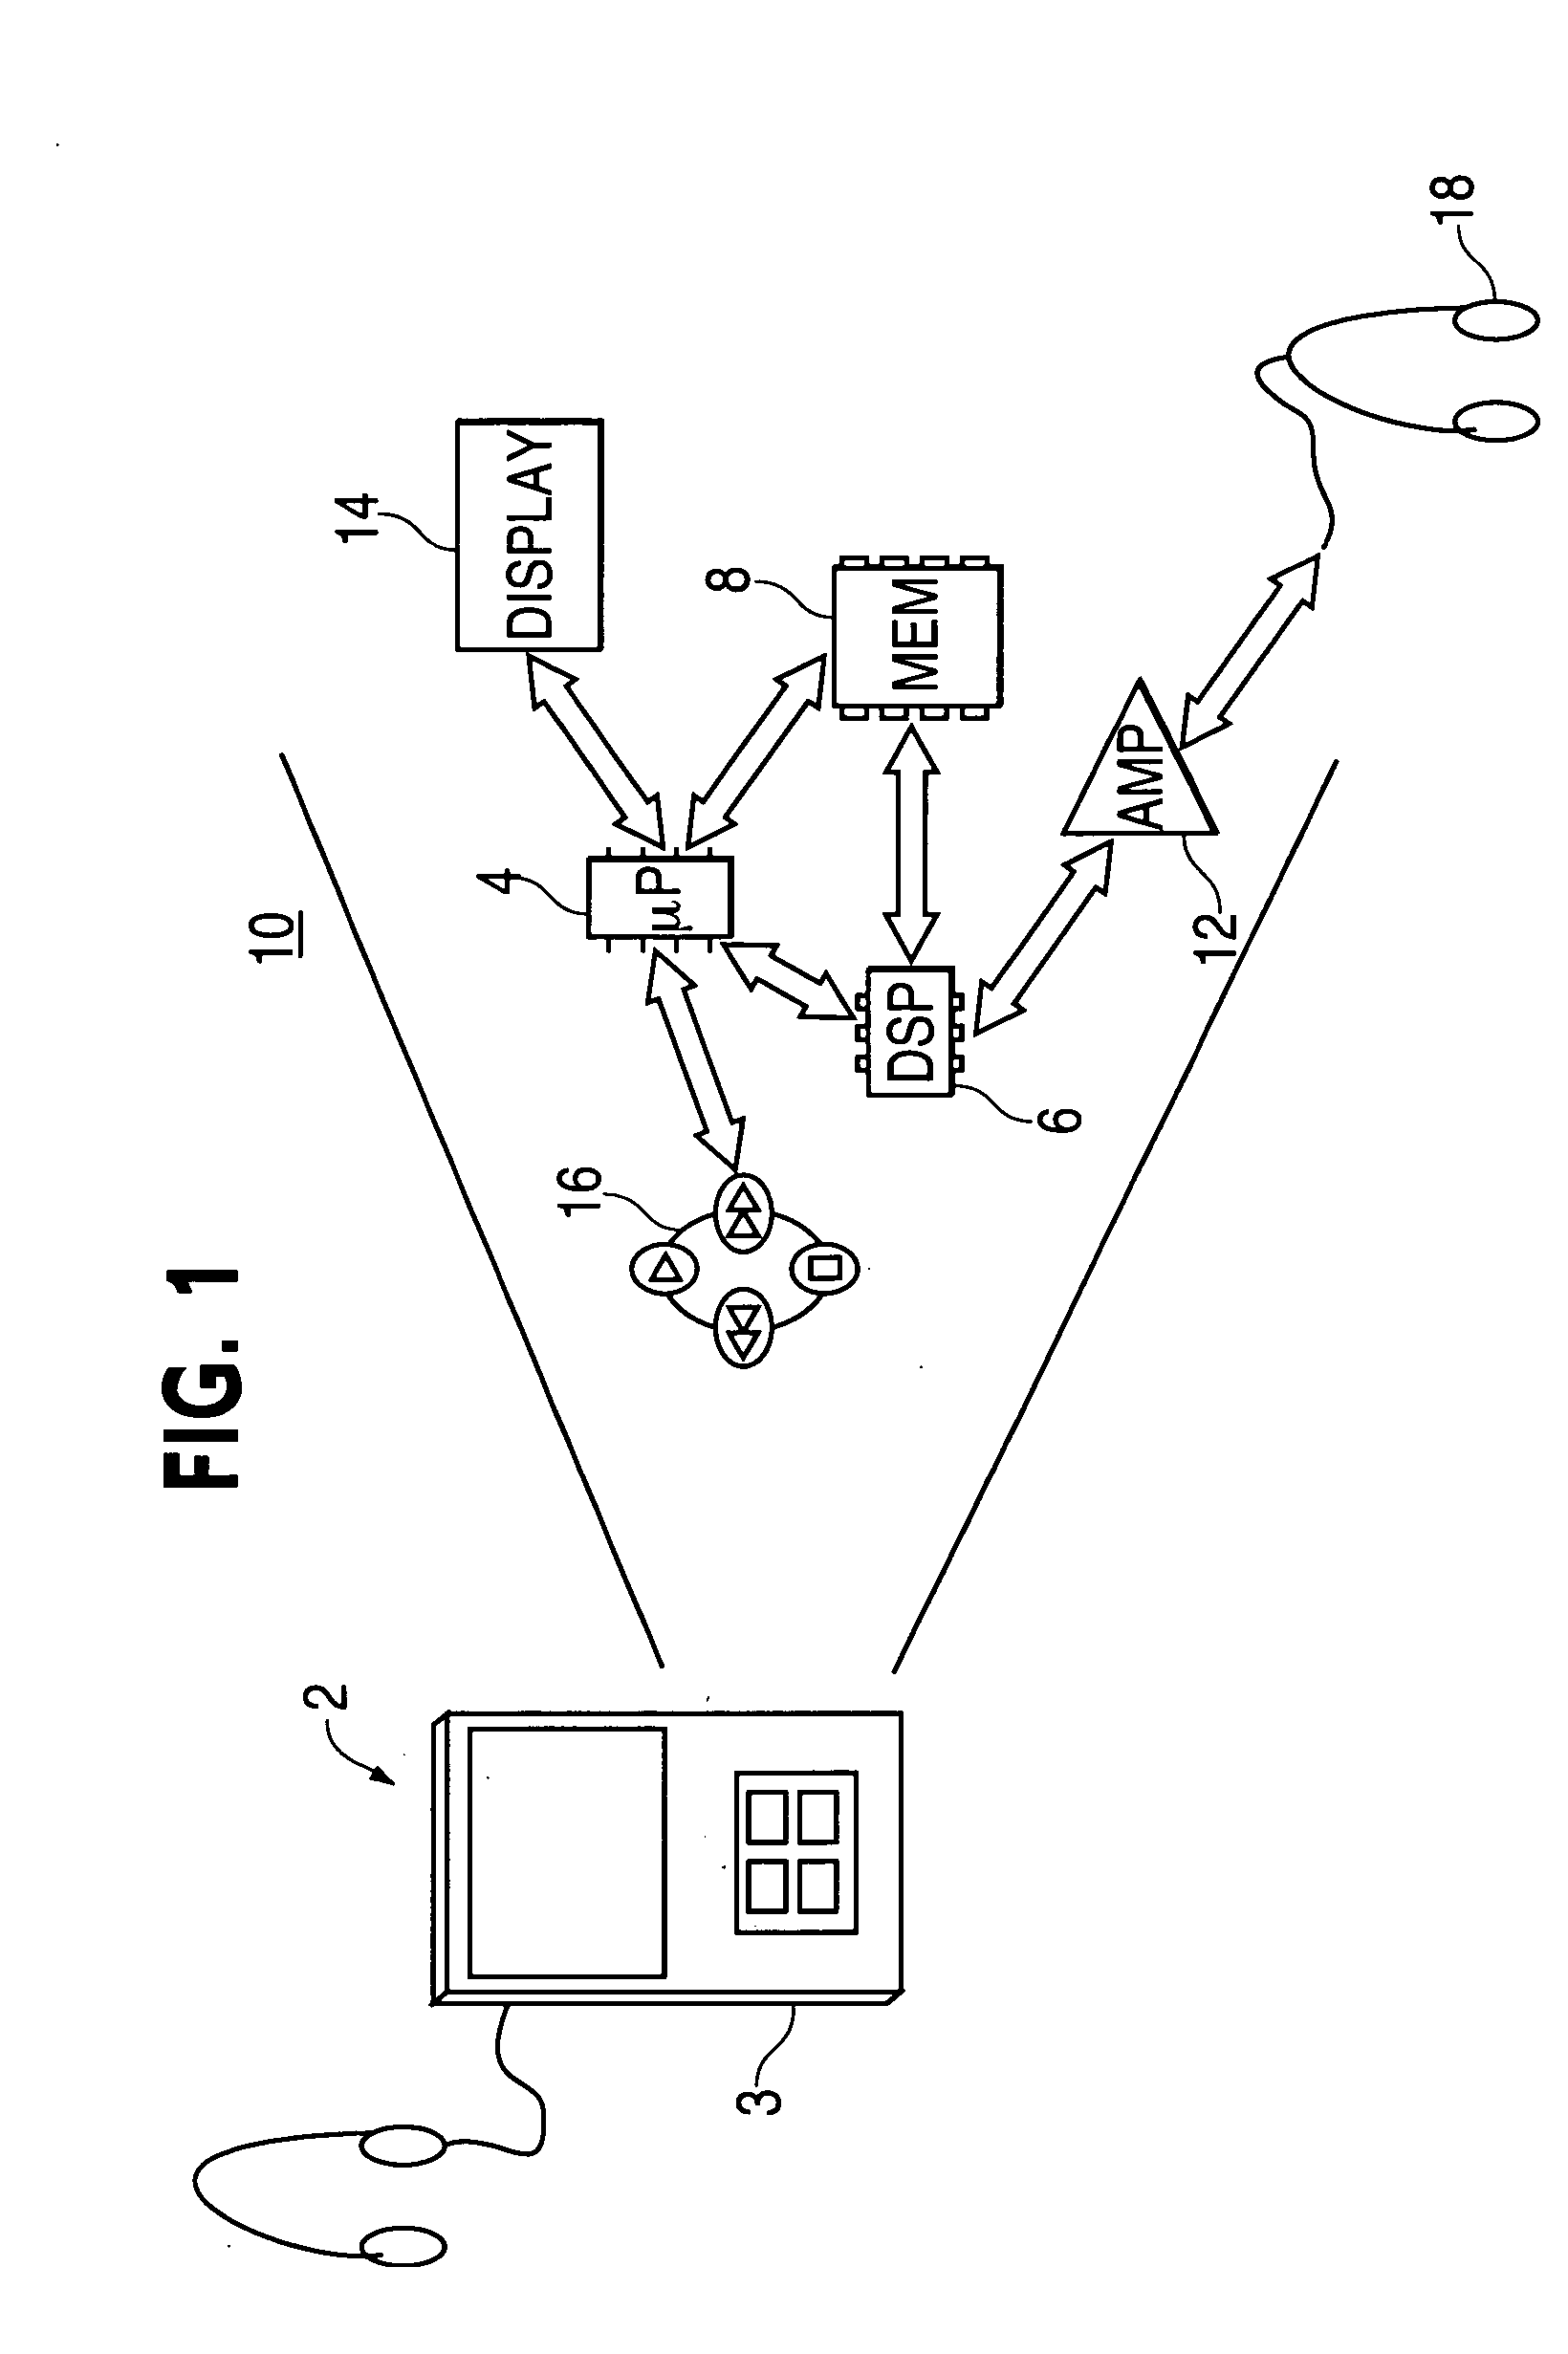 Personal media player apparatus and method